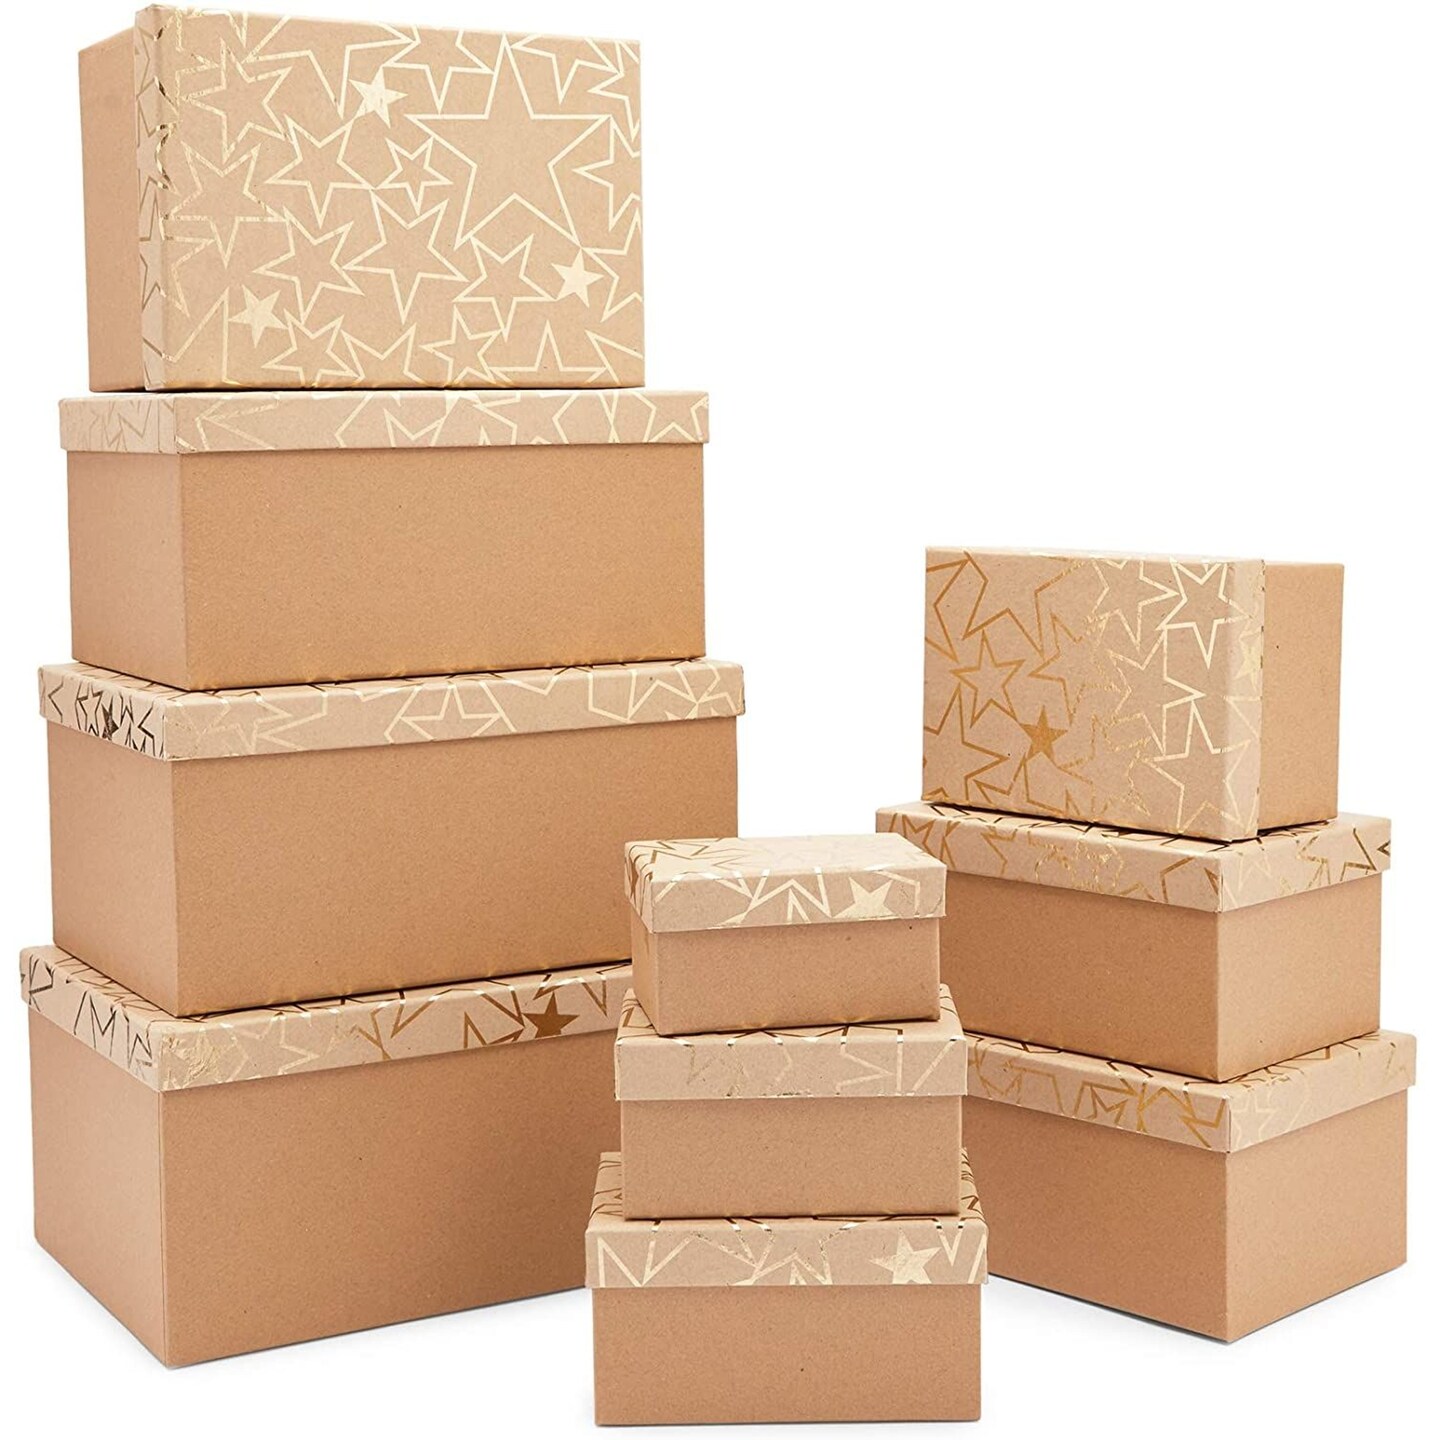 Set of 10 Nesting Gift Boxes with Lids, Cardboard Box with Silver Foil Star Designs (10 Sizes)